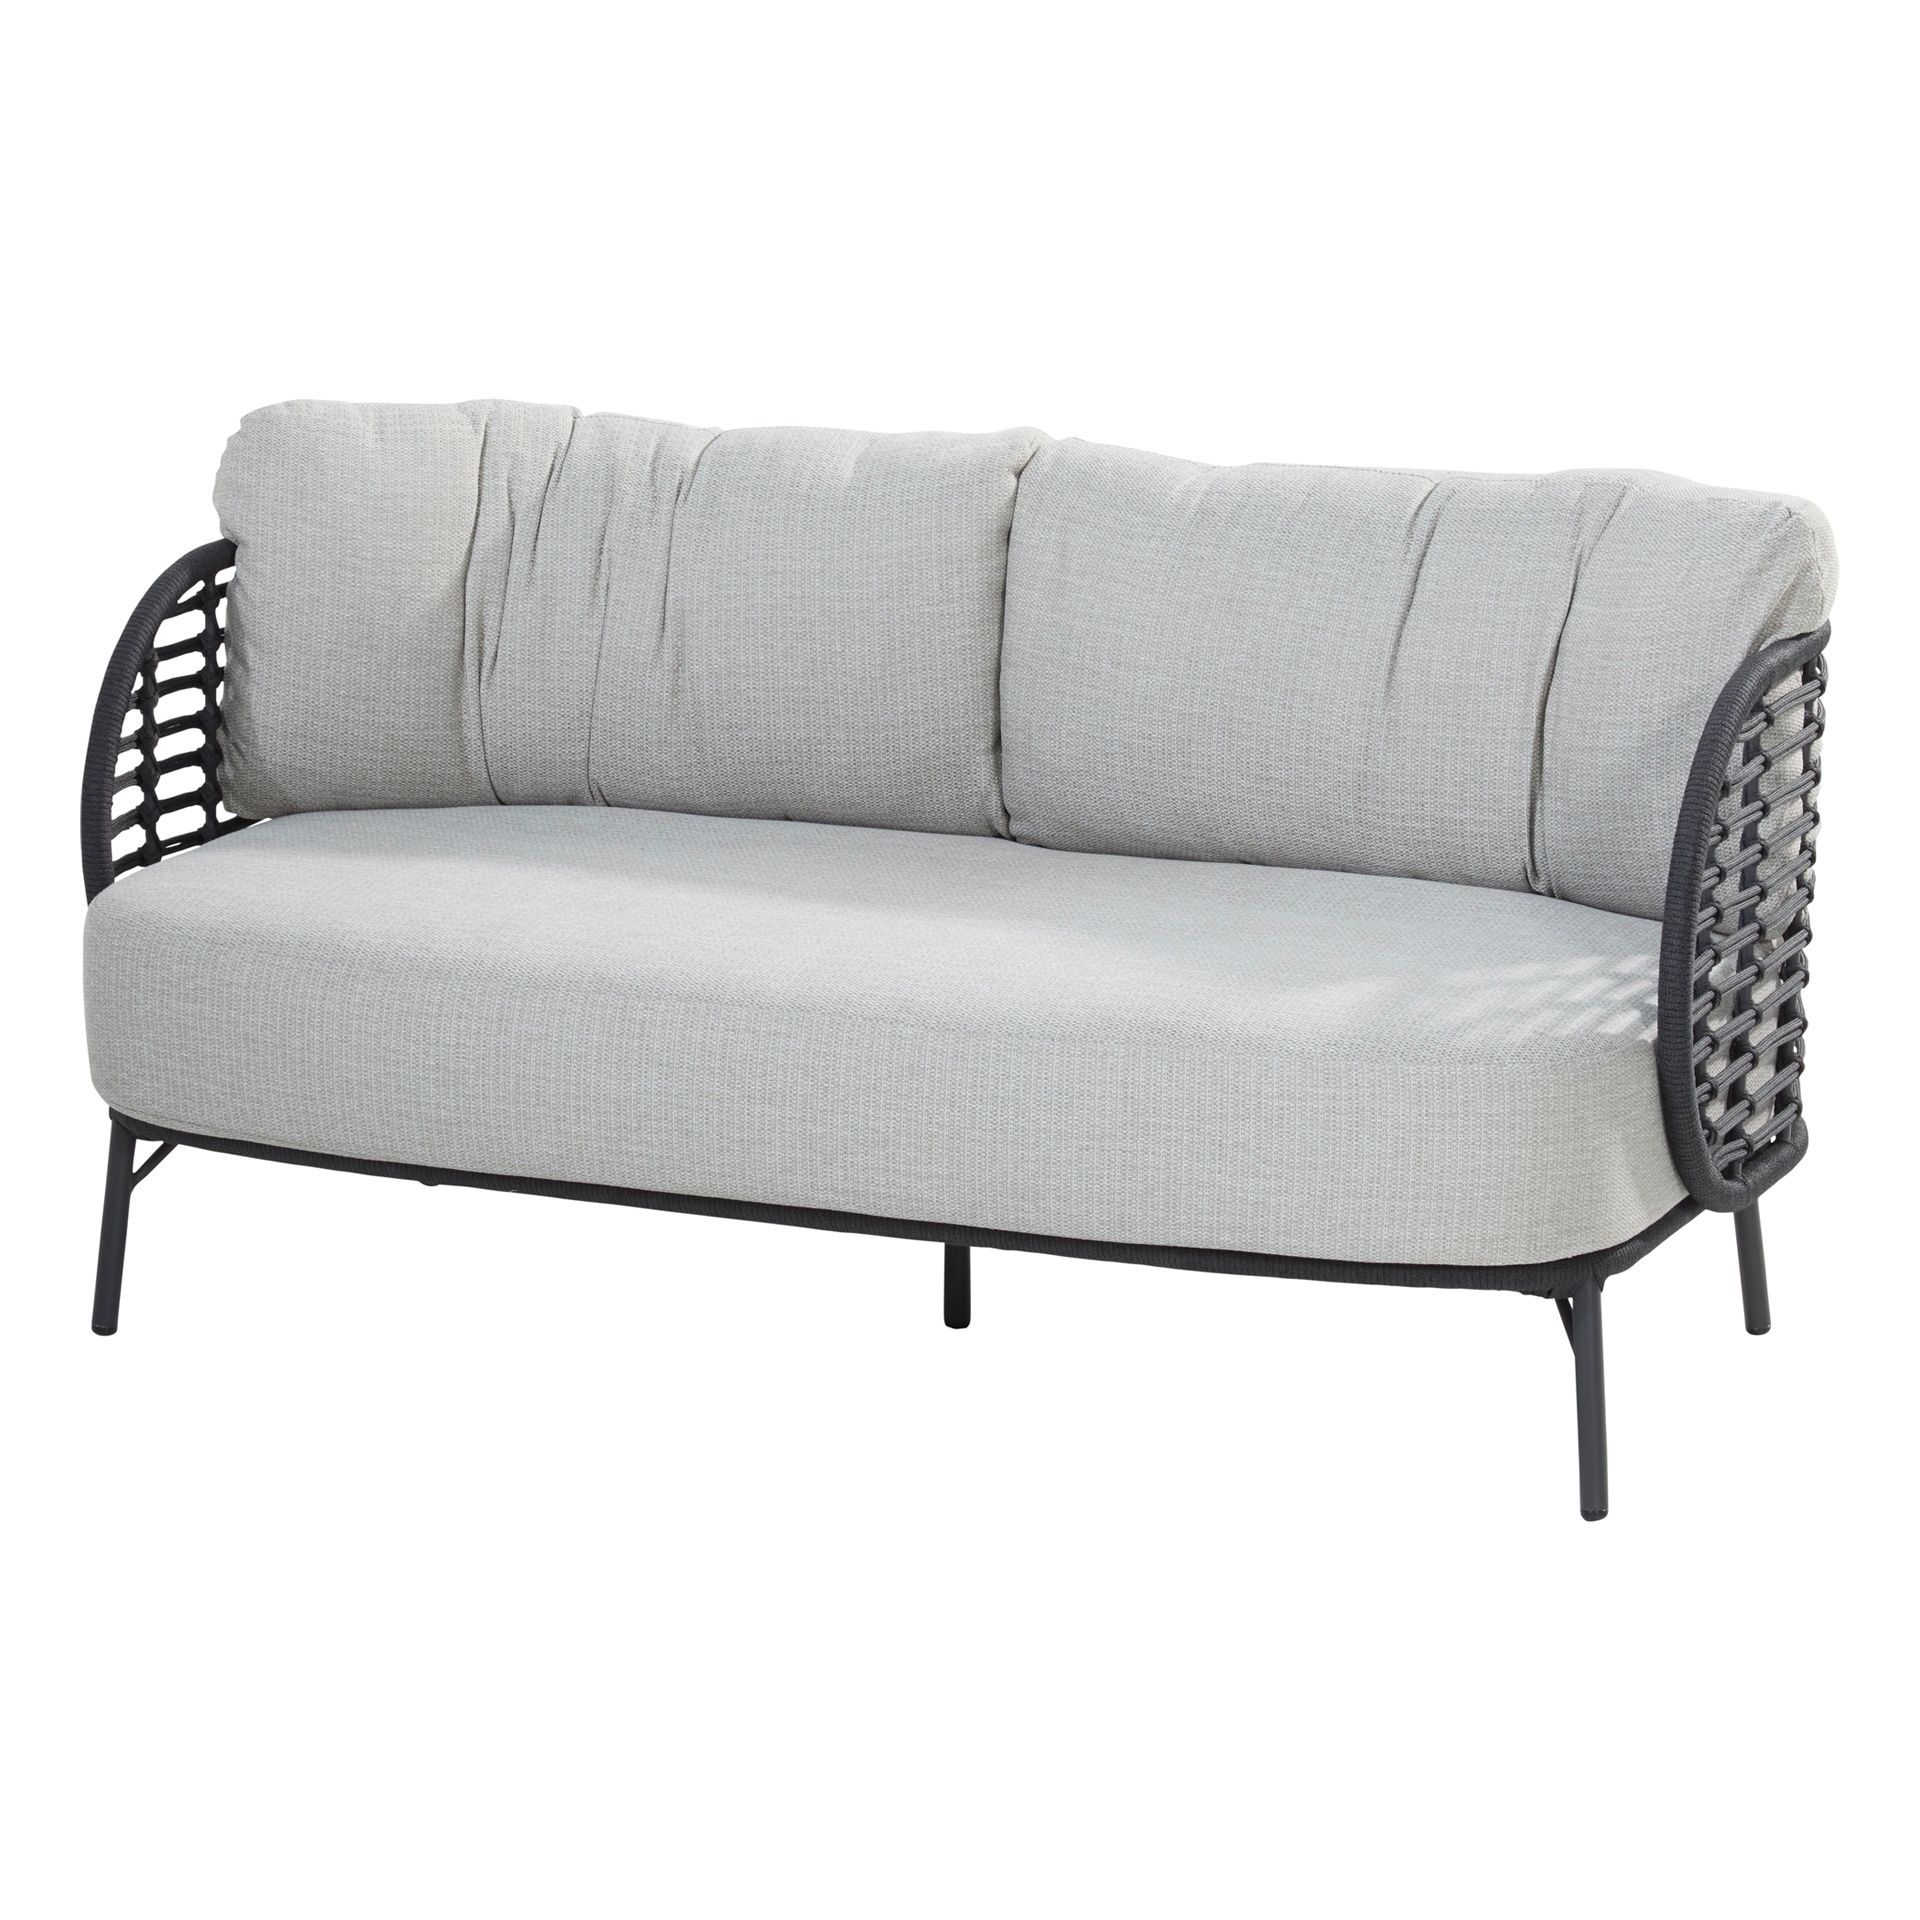 Fabrice Living Bench 2,5 seater